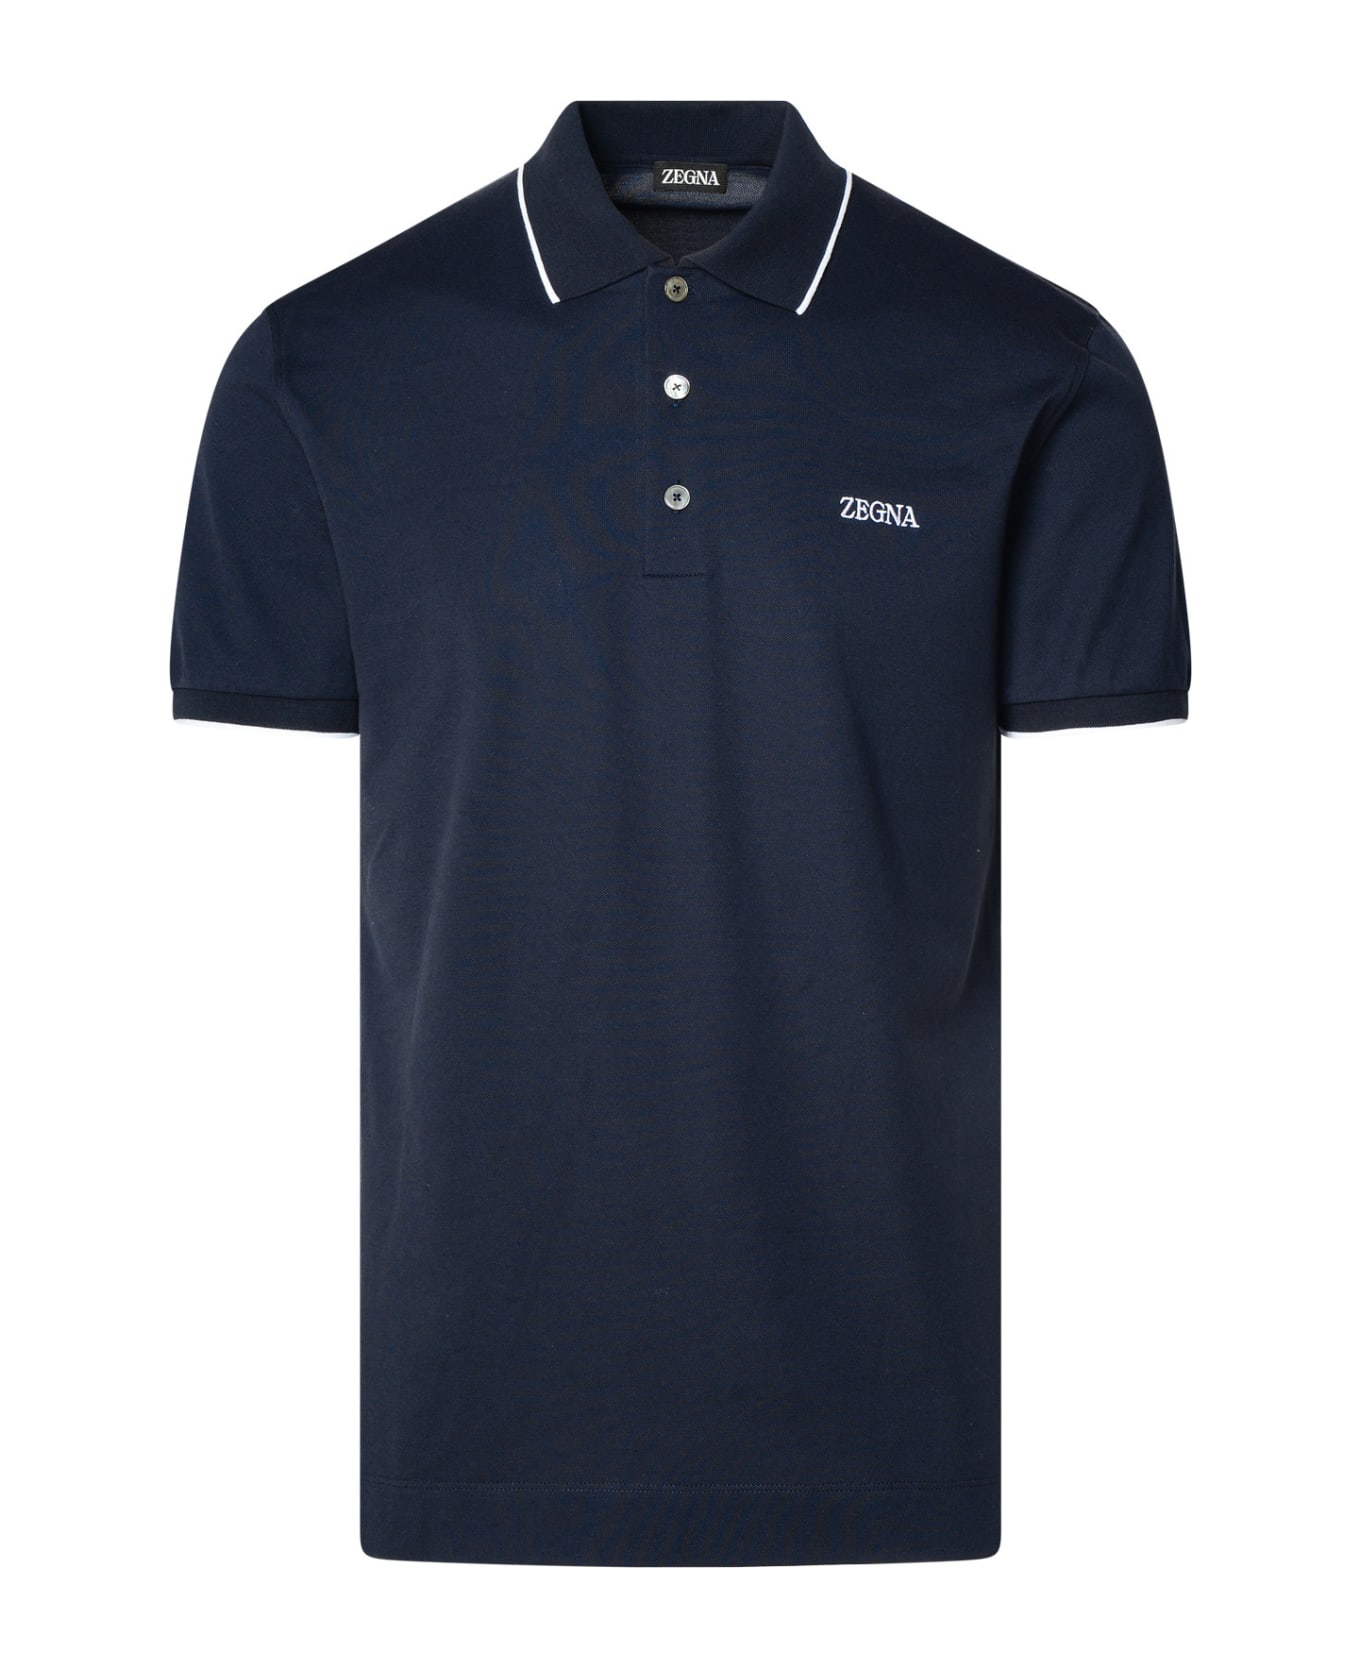 Zegna Polo Shirt In Blue Cotton - Blue ポロシャツ